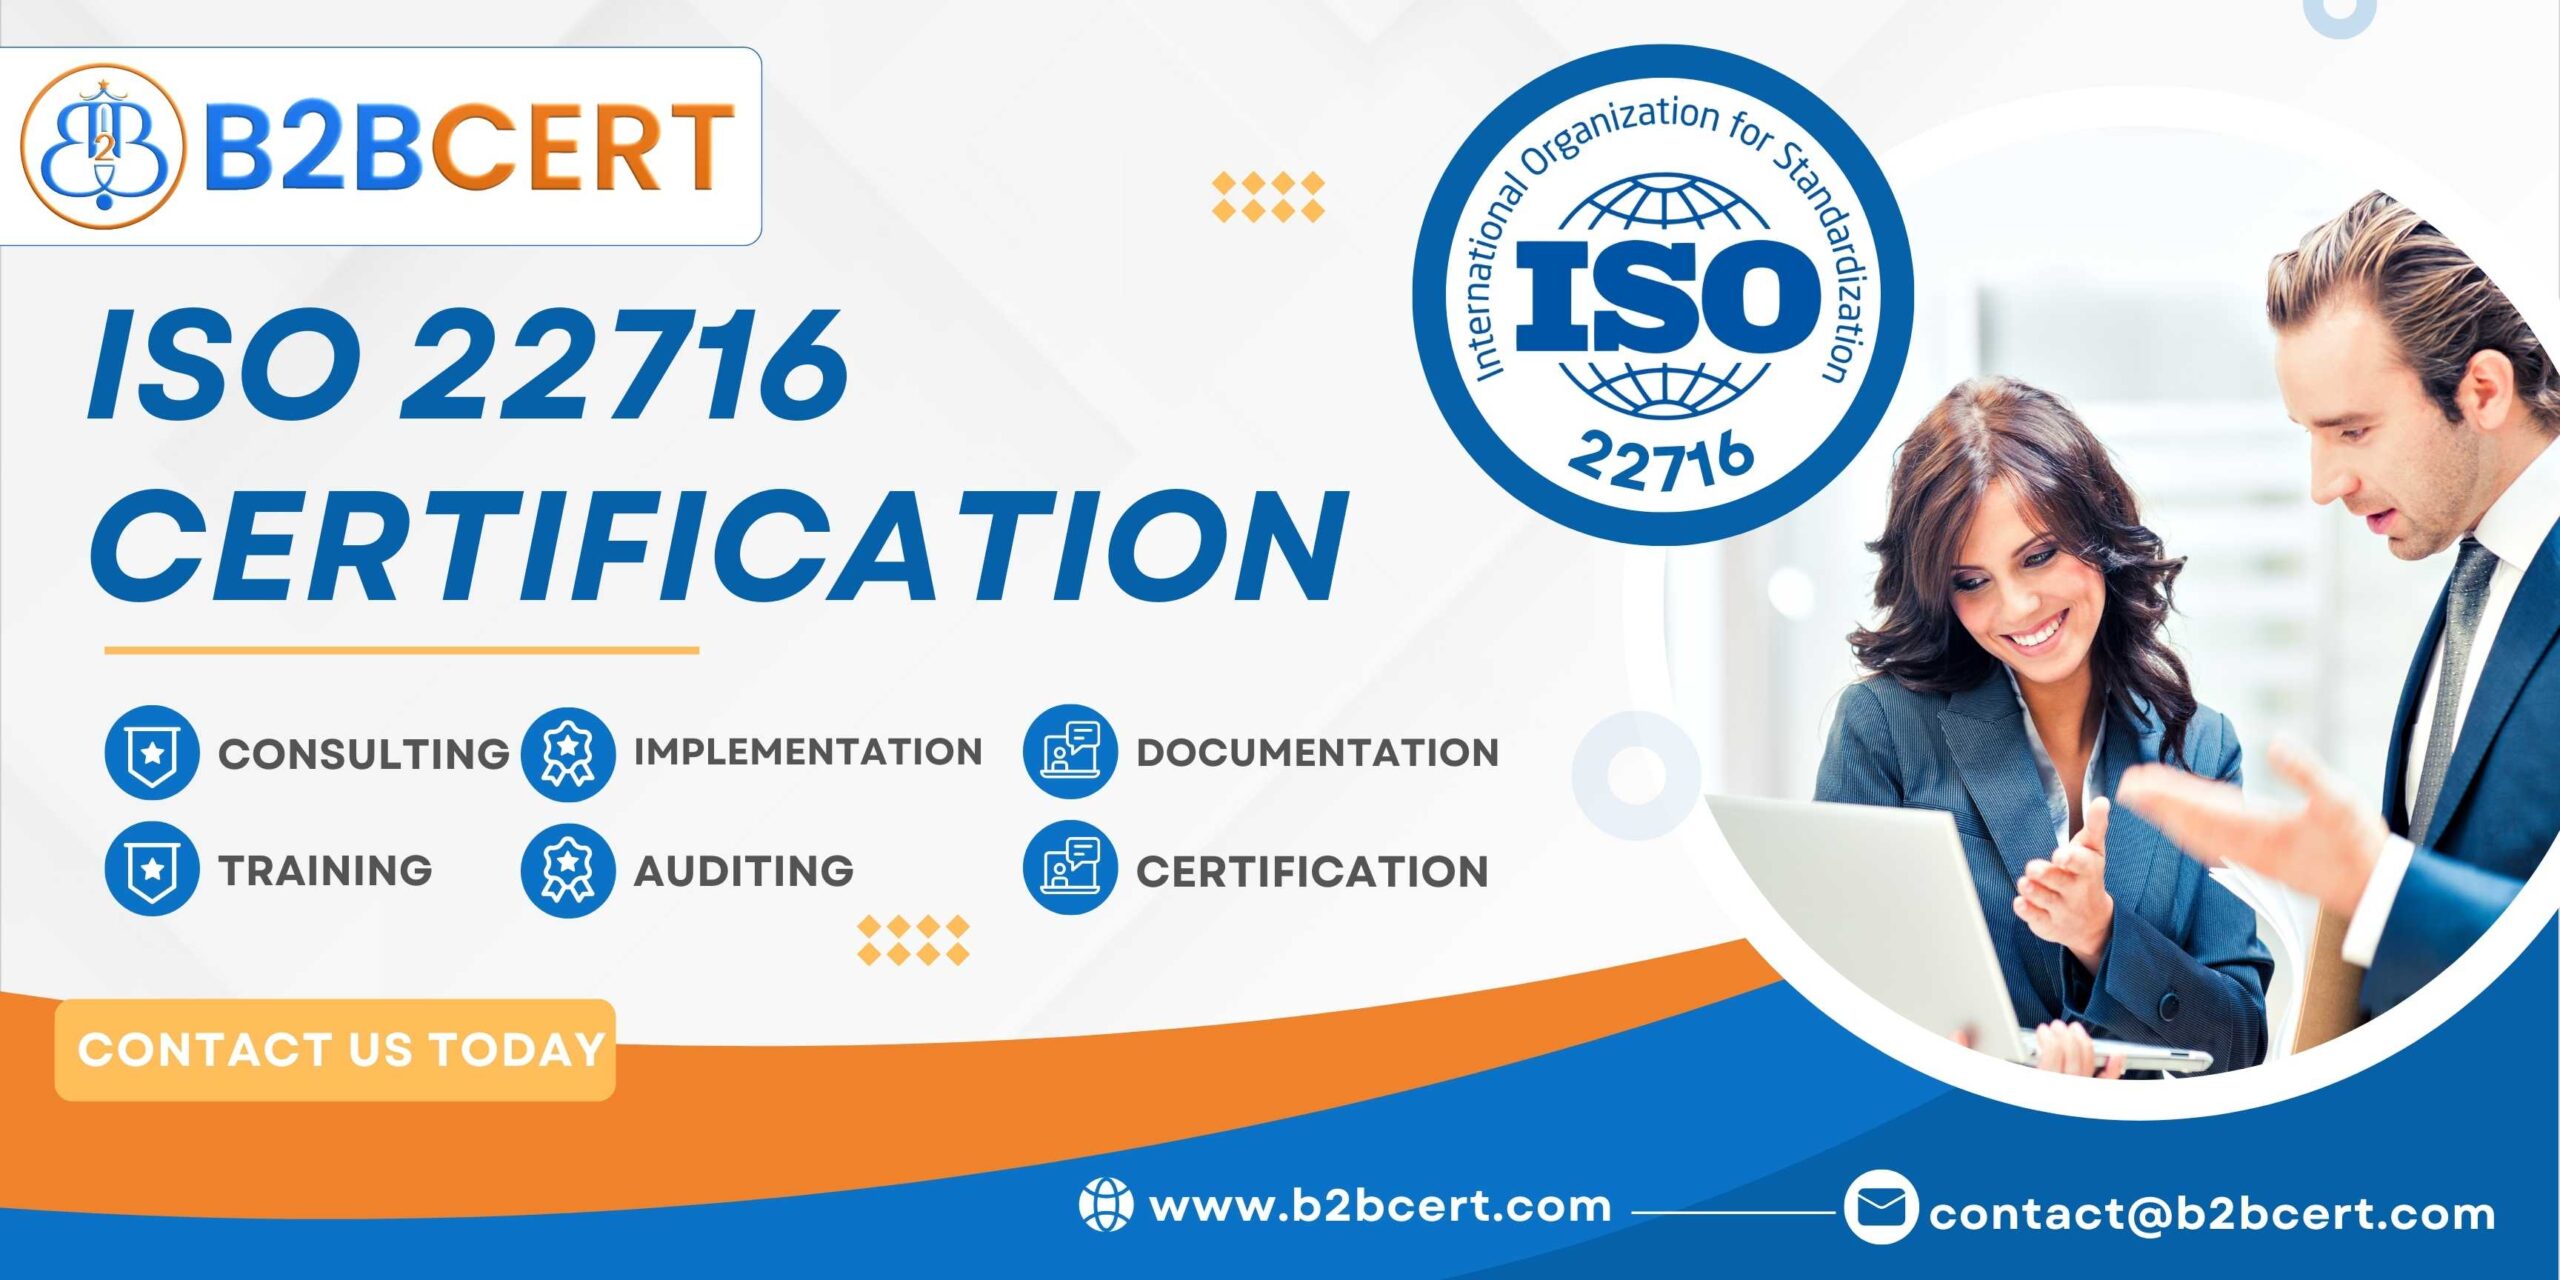 ISO 22716 Certification Guide Ensuring Quality in Cosmetics